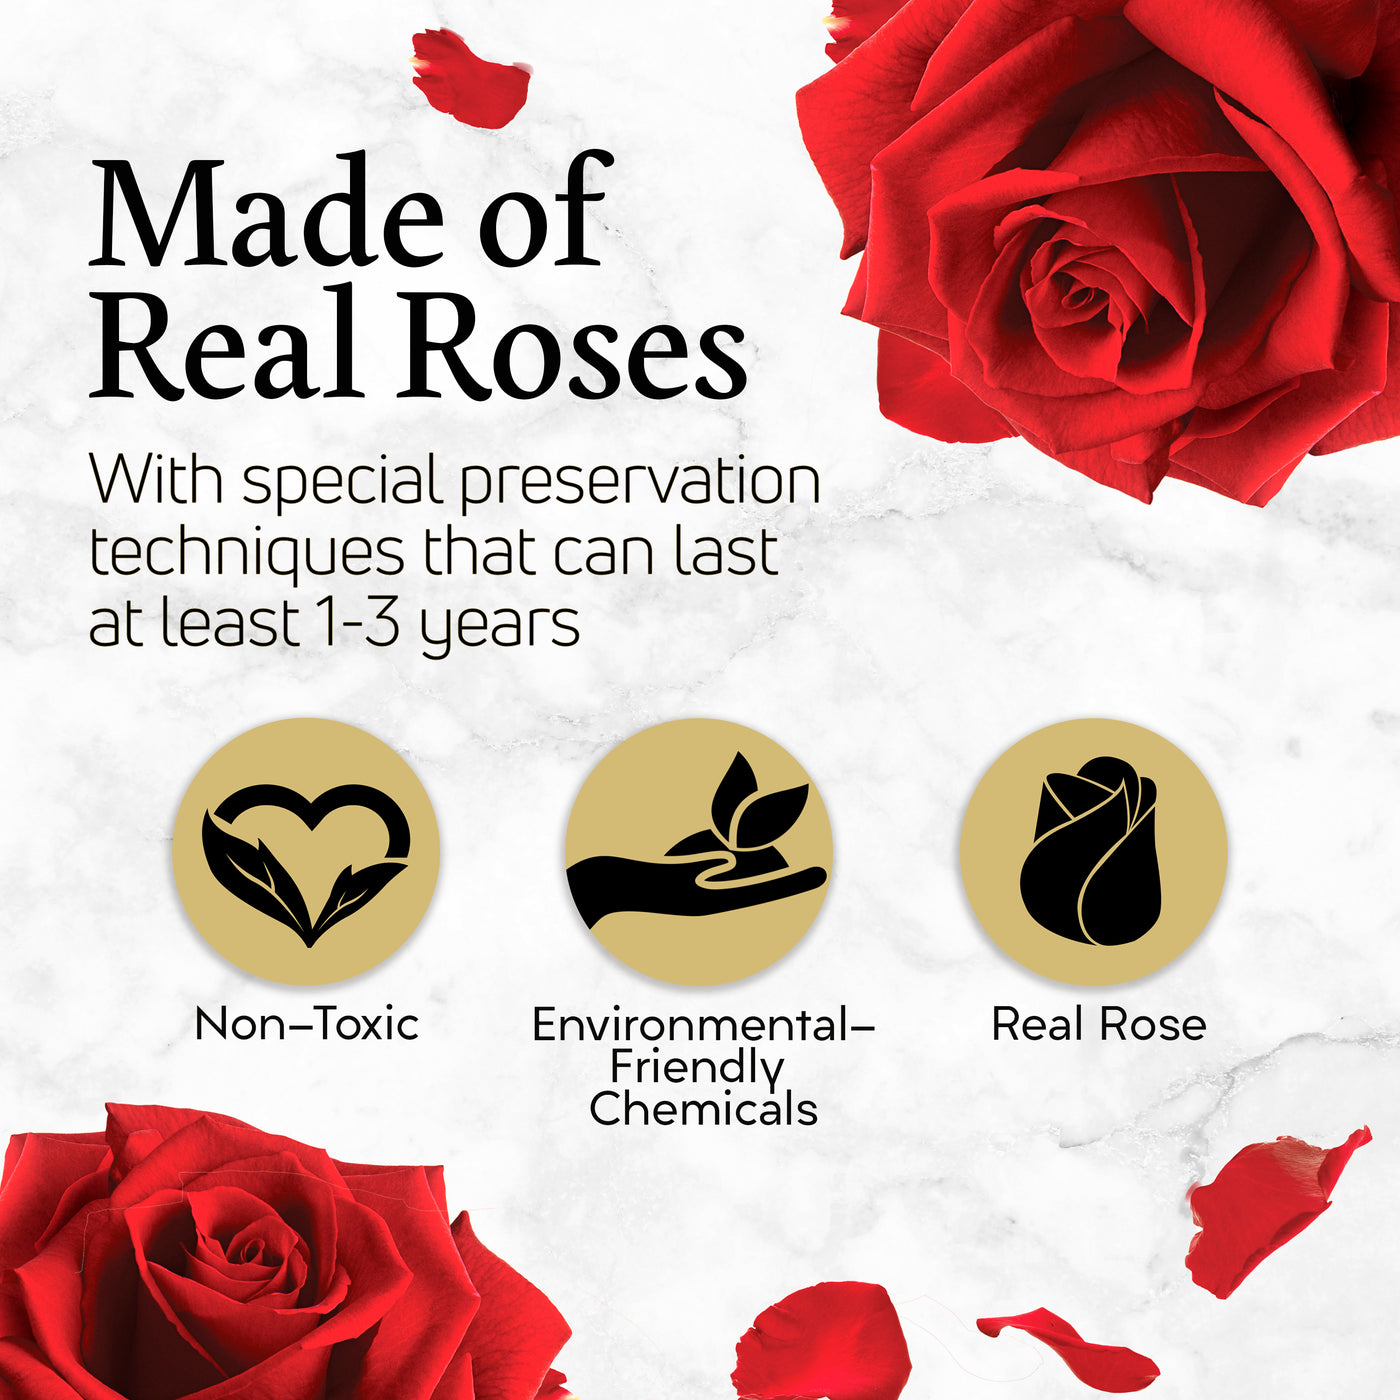 19 Preserved Real Roses in Round Black & Gold Box - Red